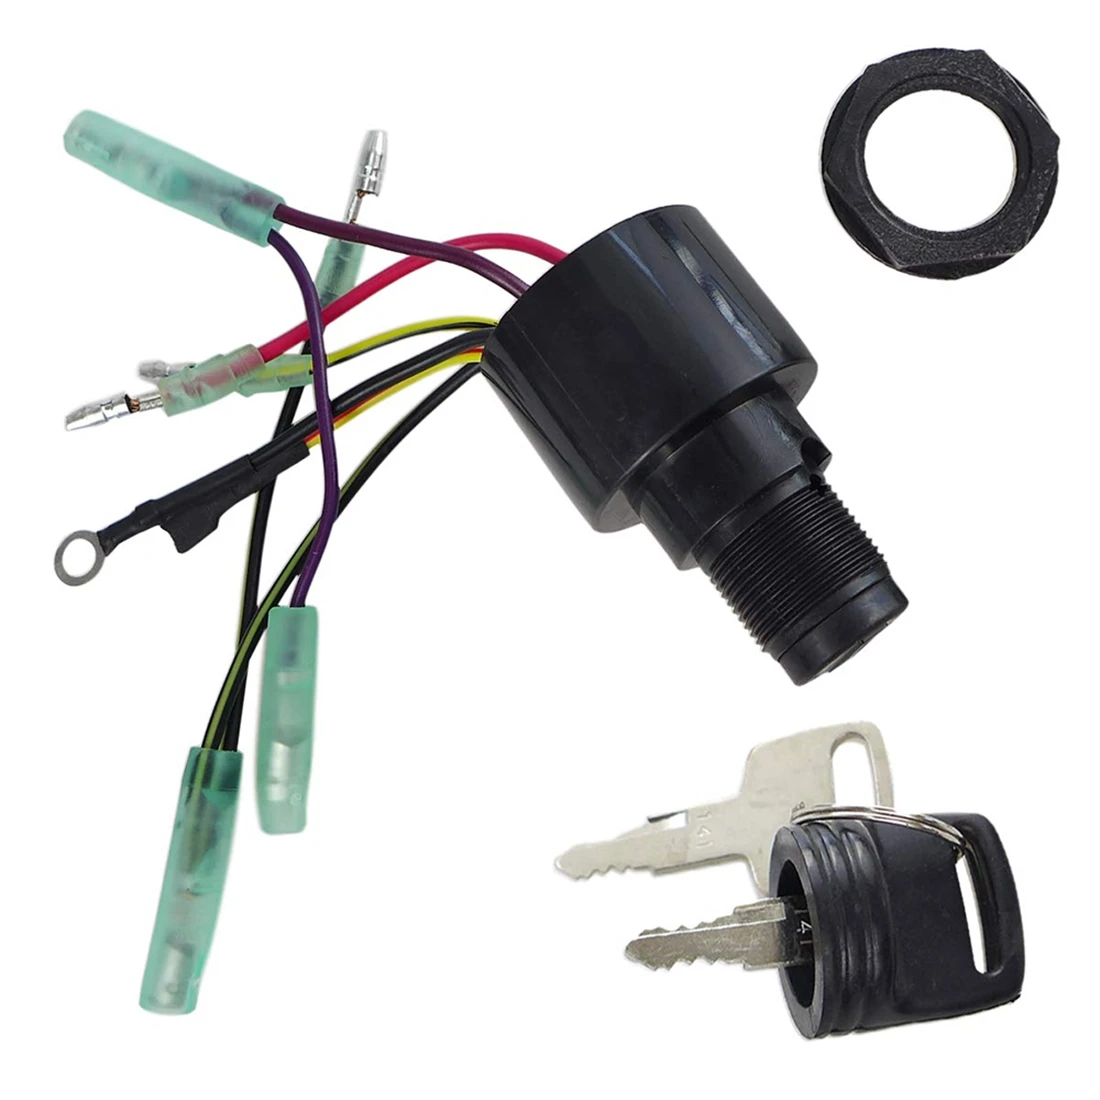 

NEW-87-17009A5 Boat Motor Ignition Key Switch for Mercury Outboard Motors 3 Position Off-Run-